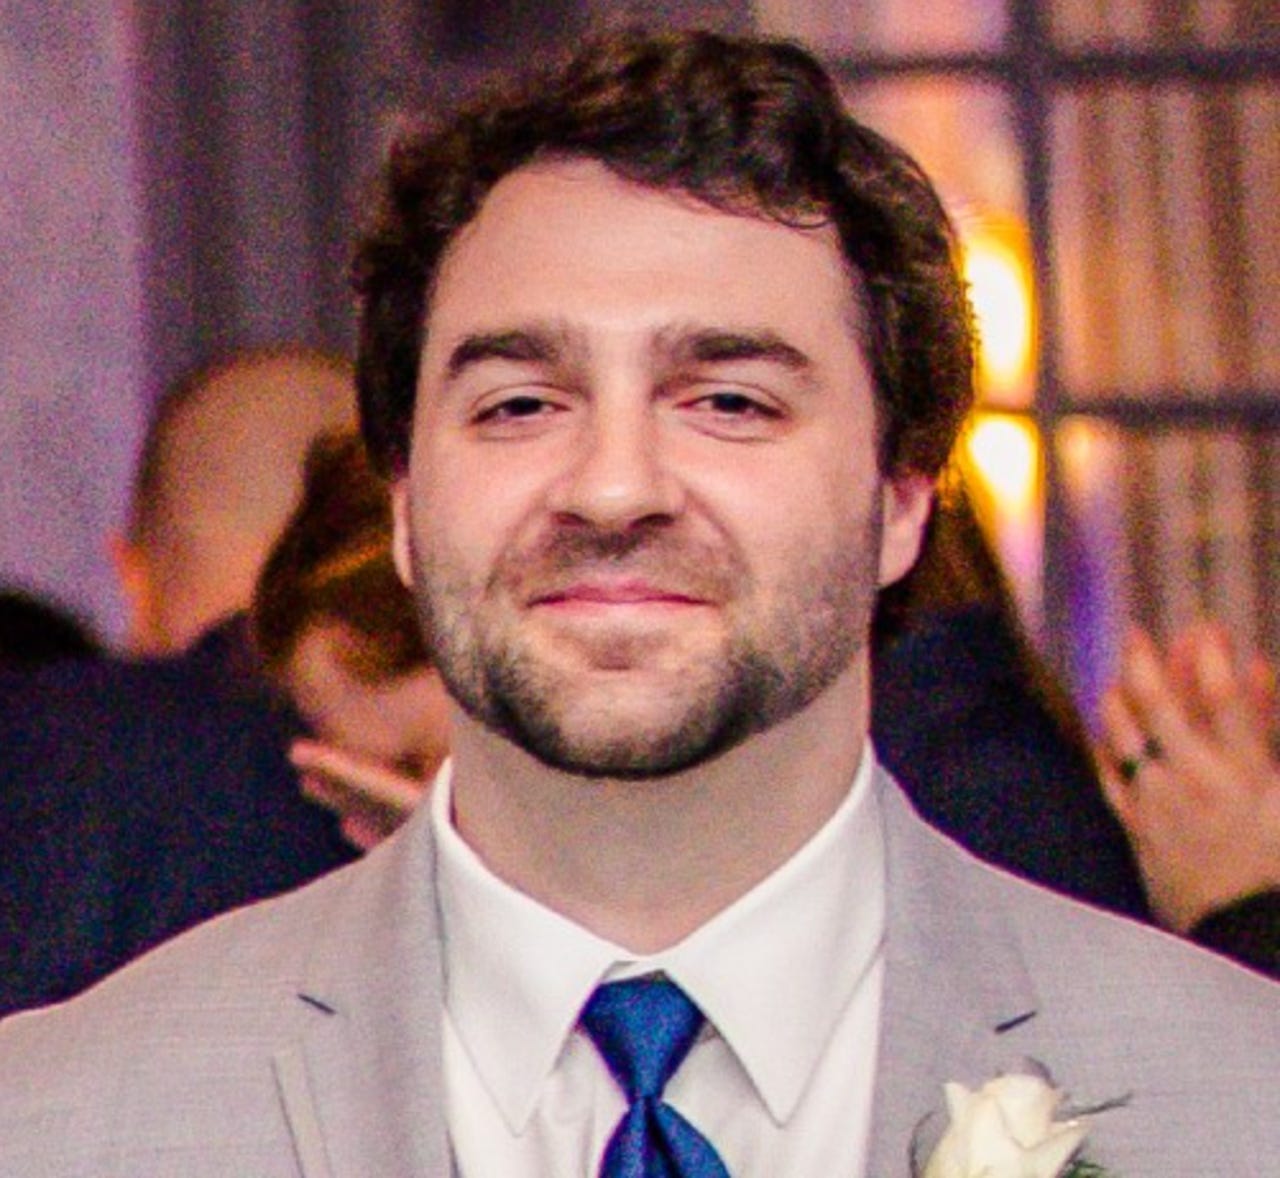 Brian Nichols, a man with dark hair and facial hair, wears a suit and smiles at the camera.